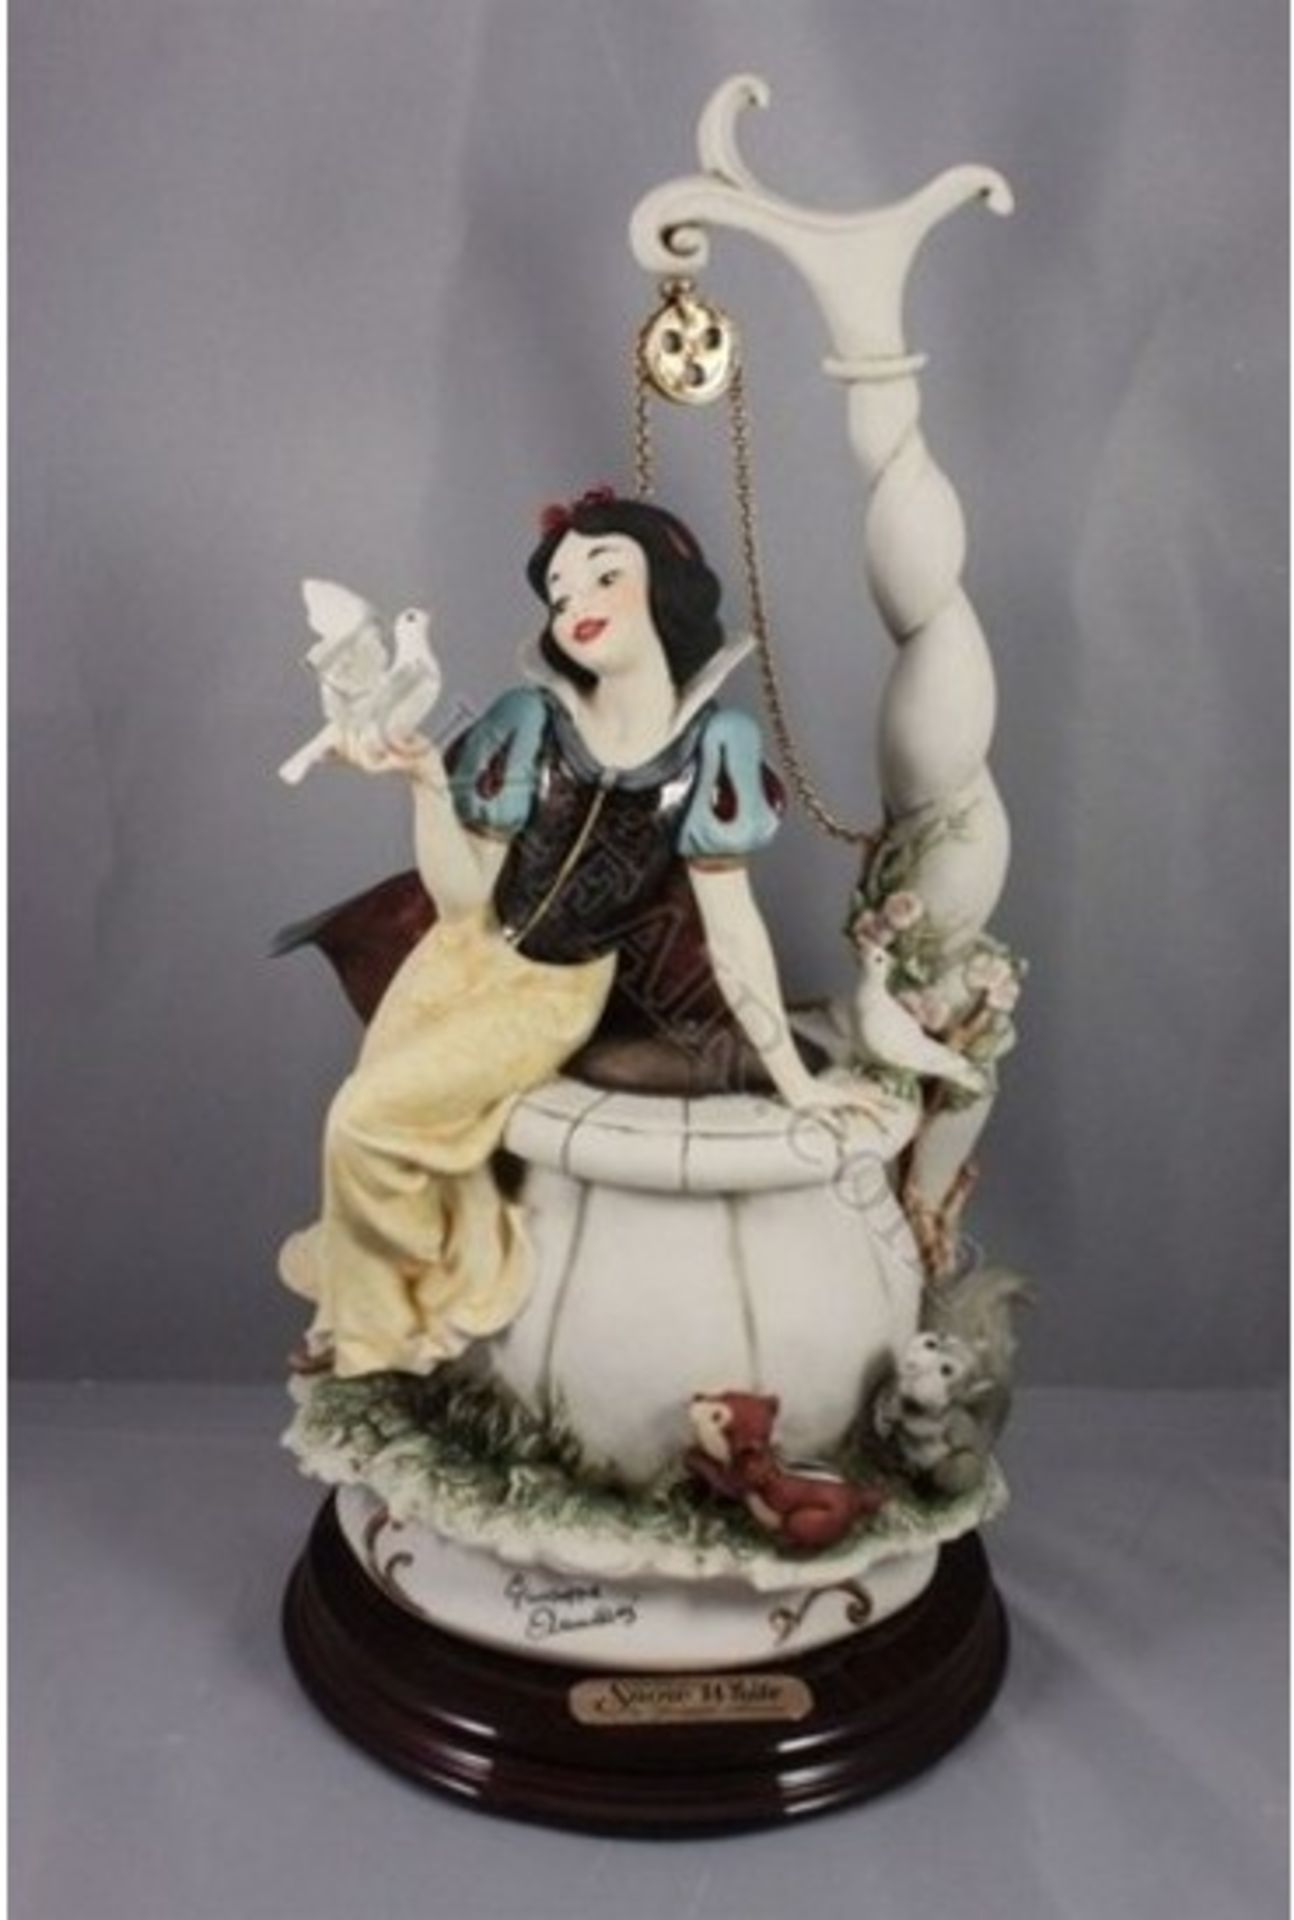 GIUSEPPE ARMANI COLLECTIBLE - SNOW WHITE AT THE WISHING WELL - #0199-C - Image 2 of 2